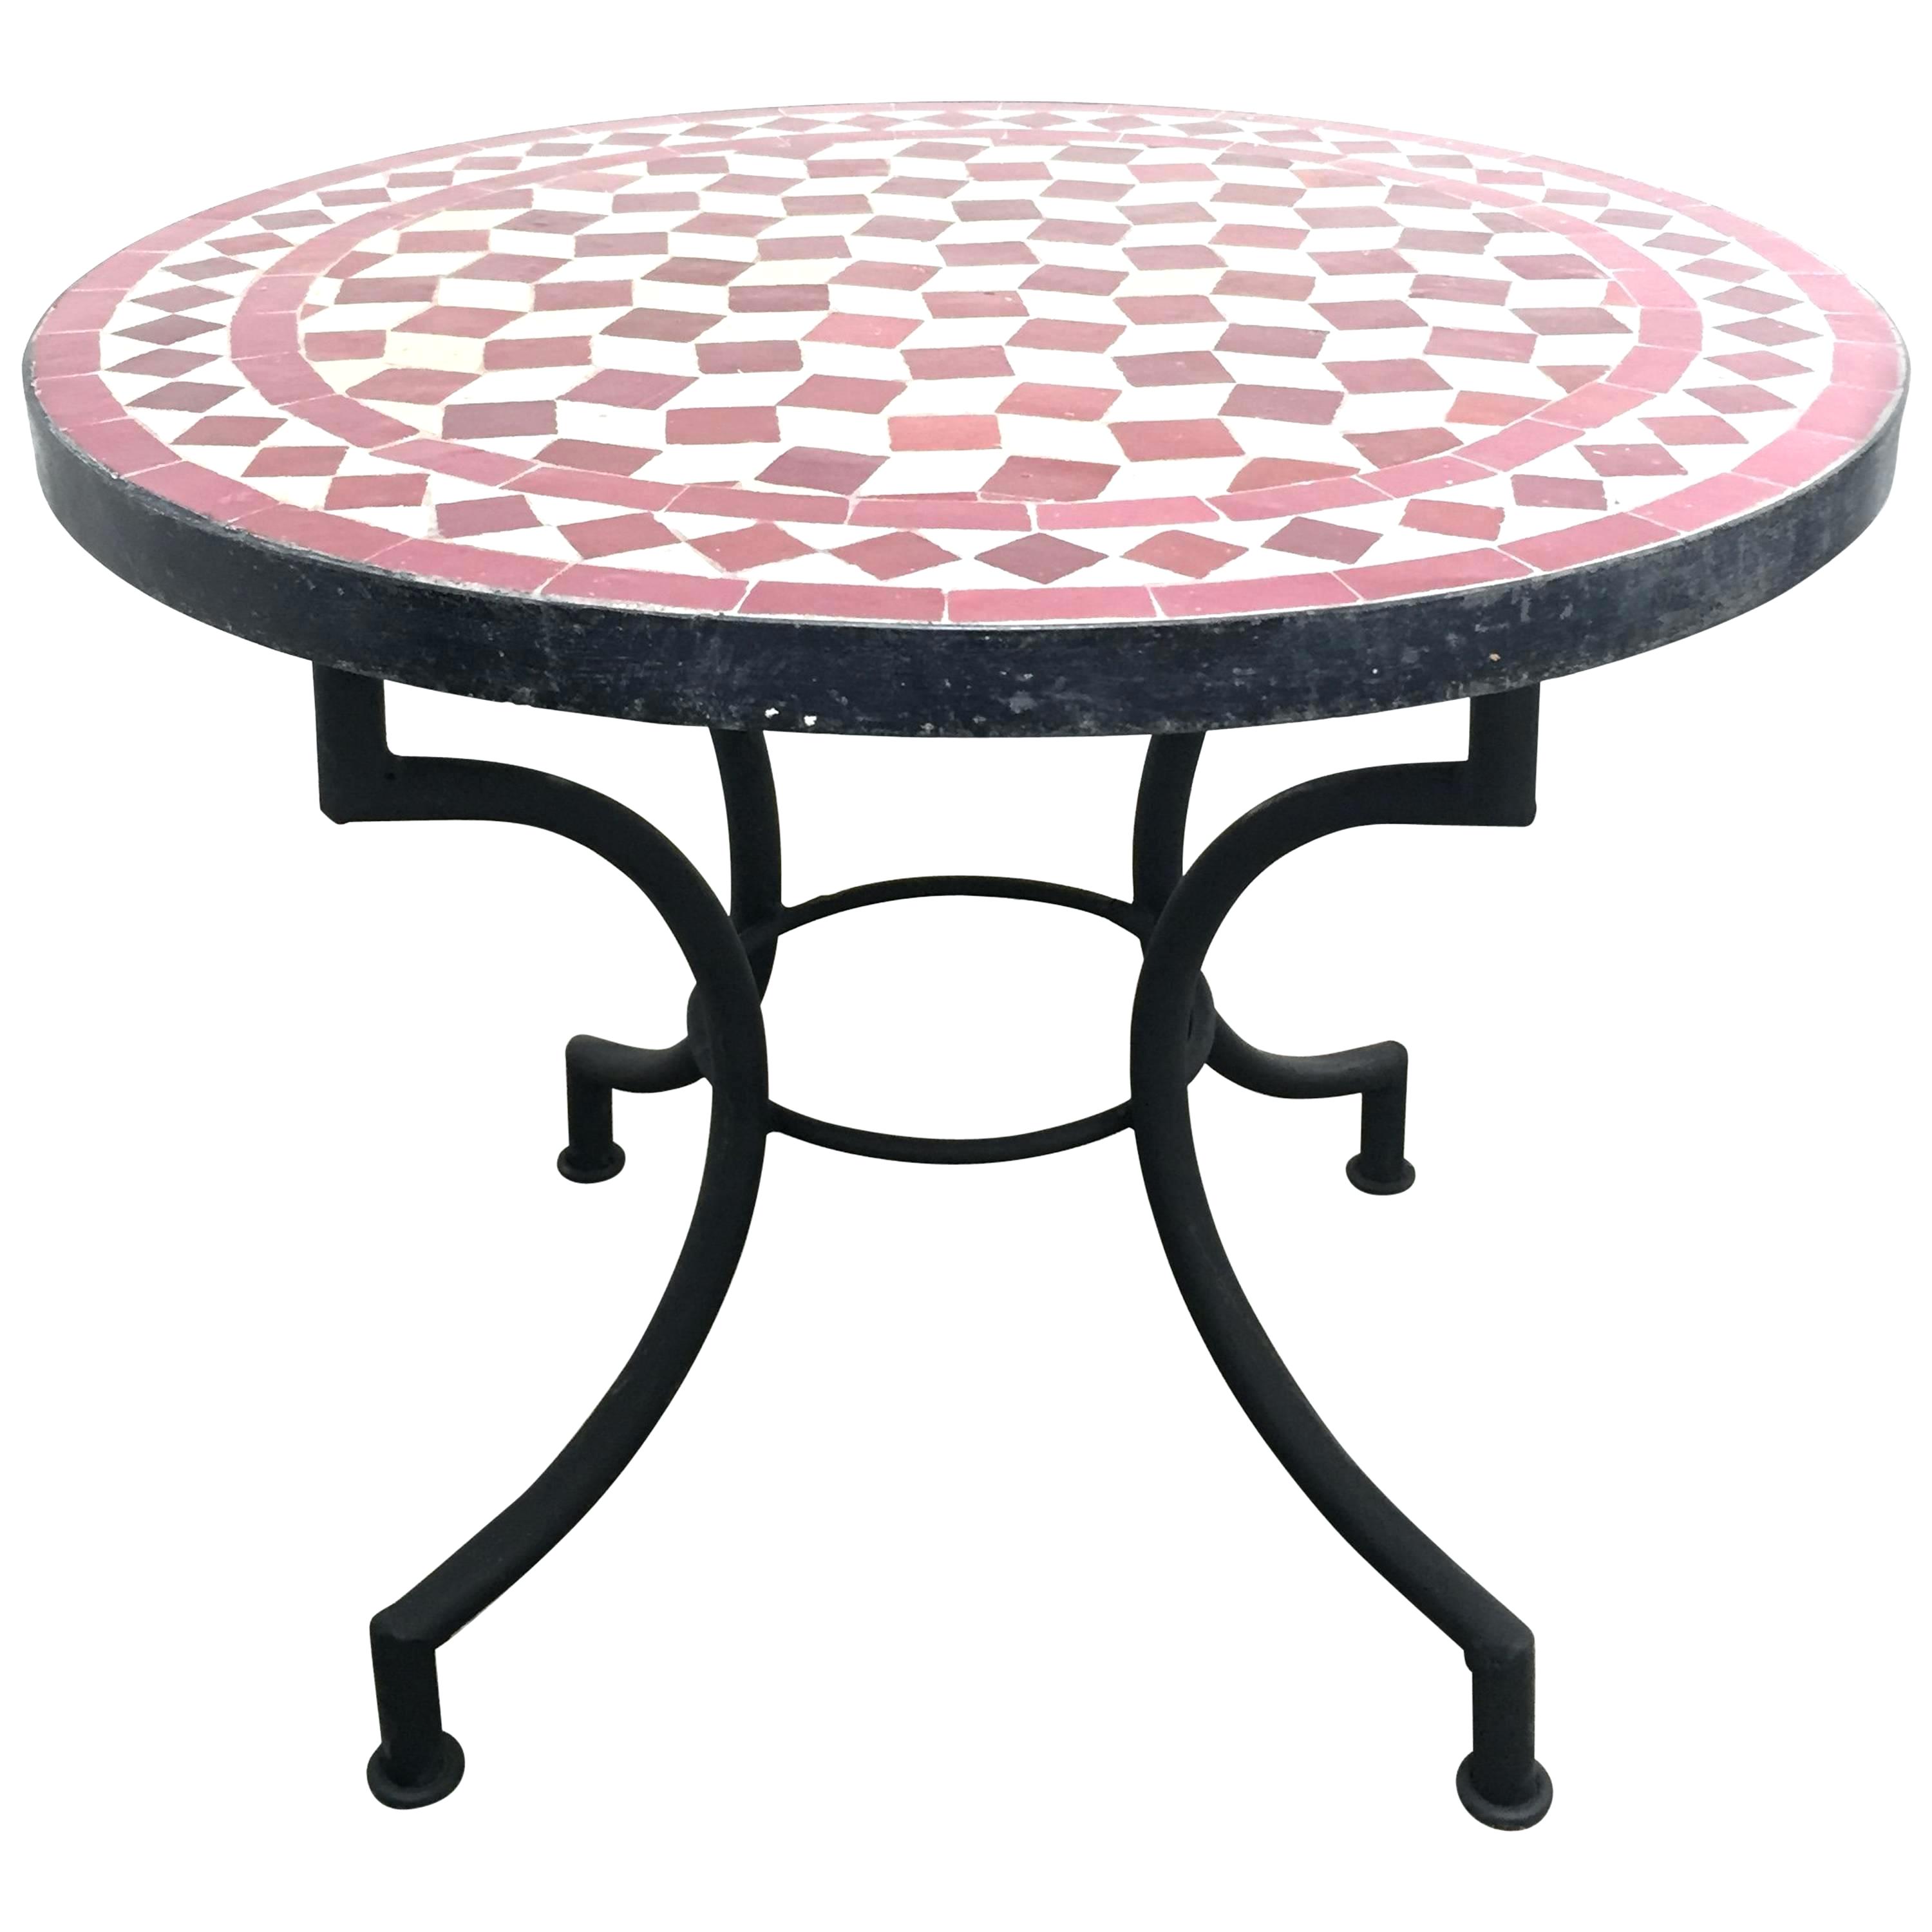 mosaic side table red outdoor cybermotors low iron base for indoor tile vintage replica furniture small accent lamps kitchen large floor mirror website design acrylic nesting end